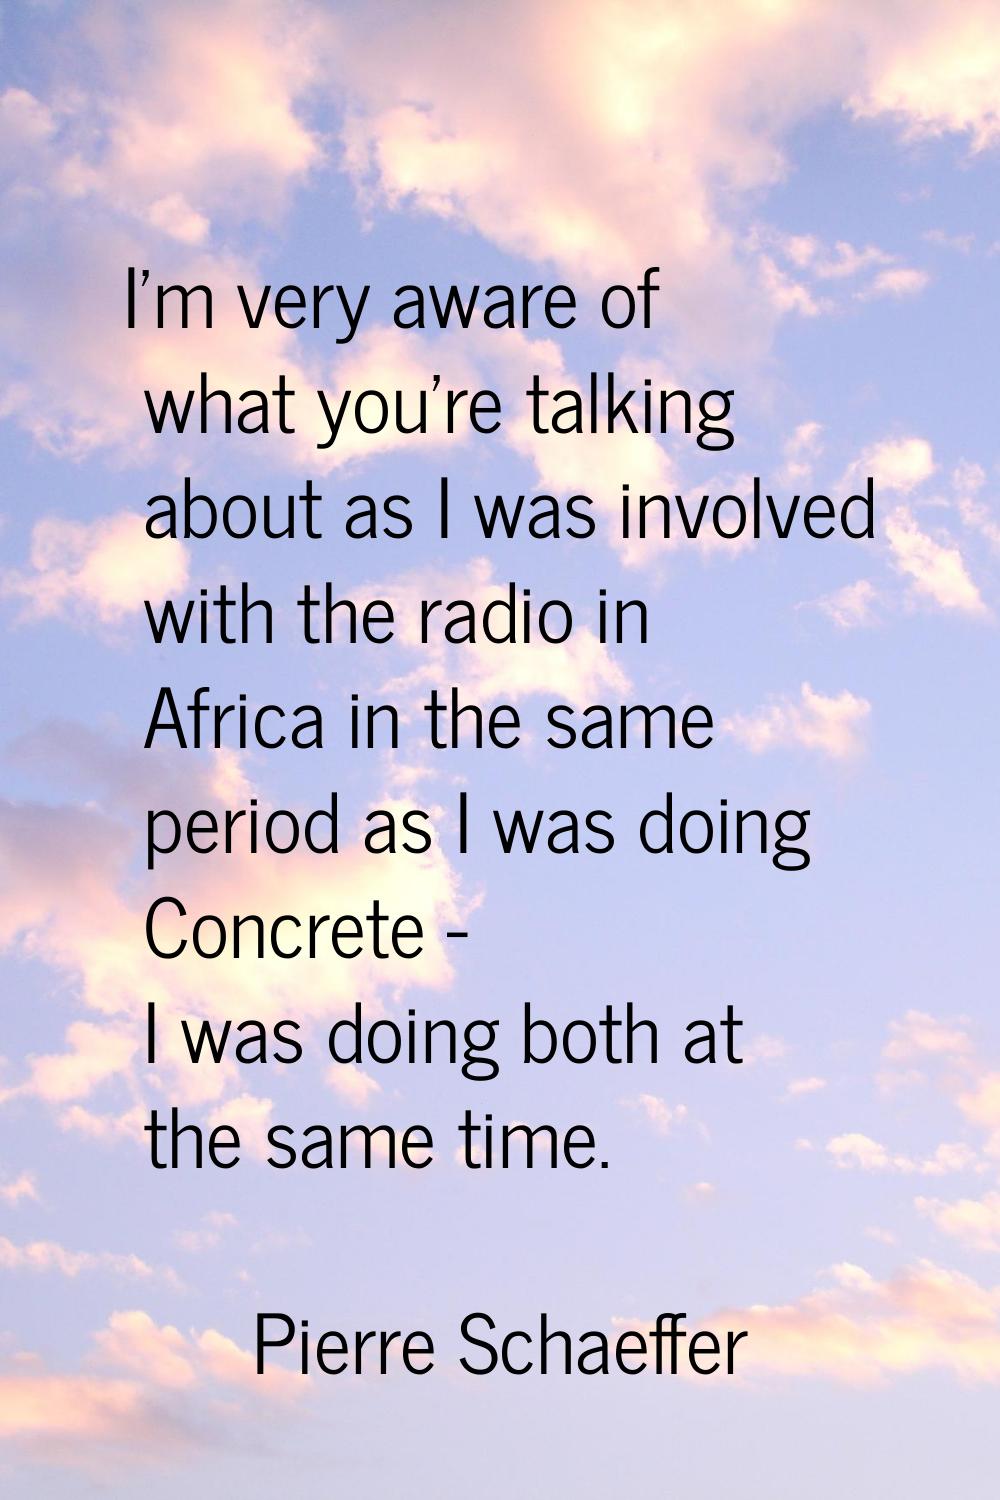 I'm very aware of what you're talking about as I was involved with the radio in Africa in the same 